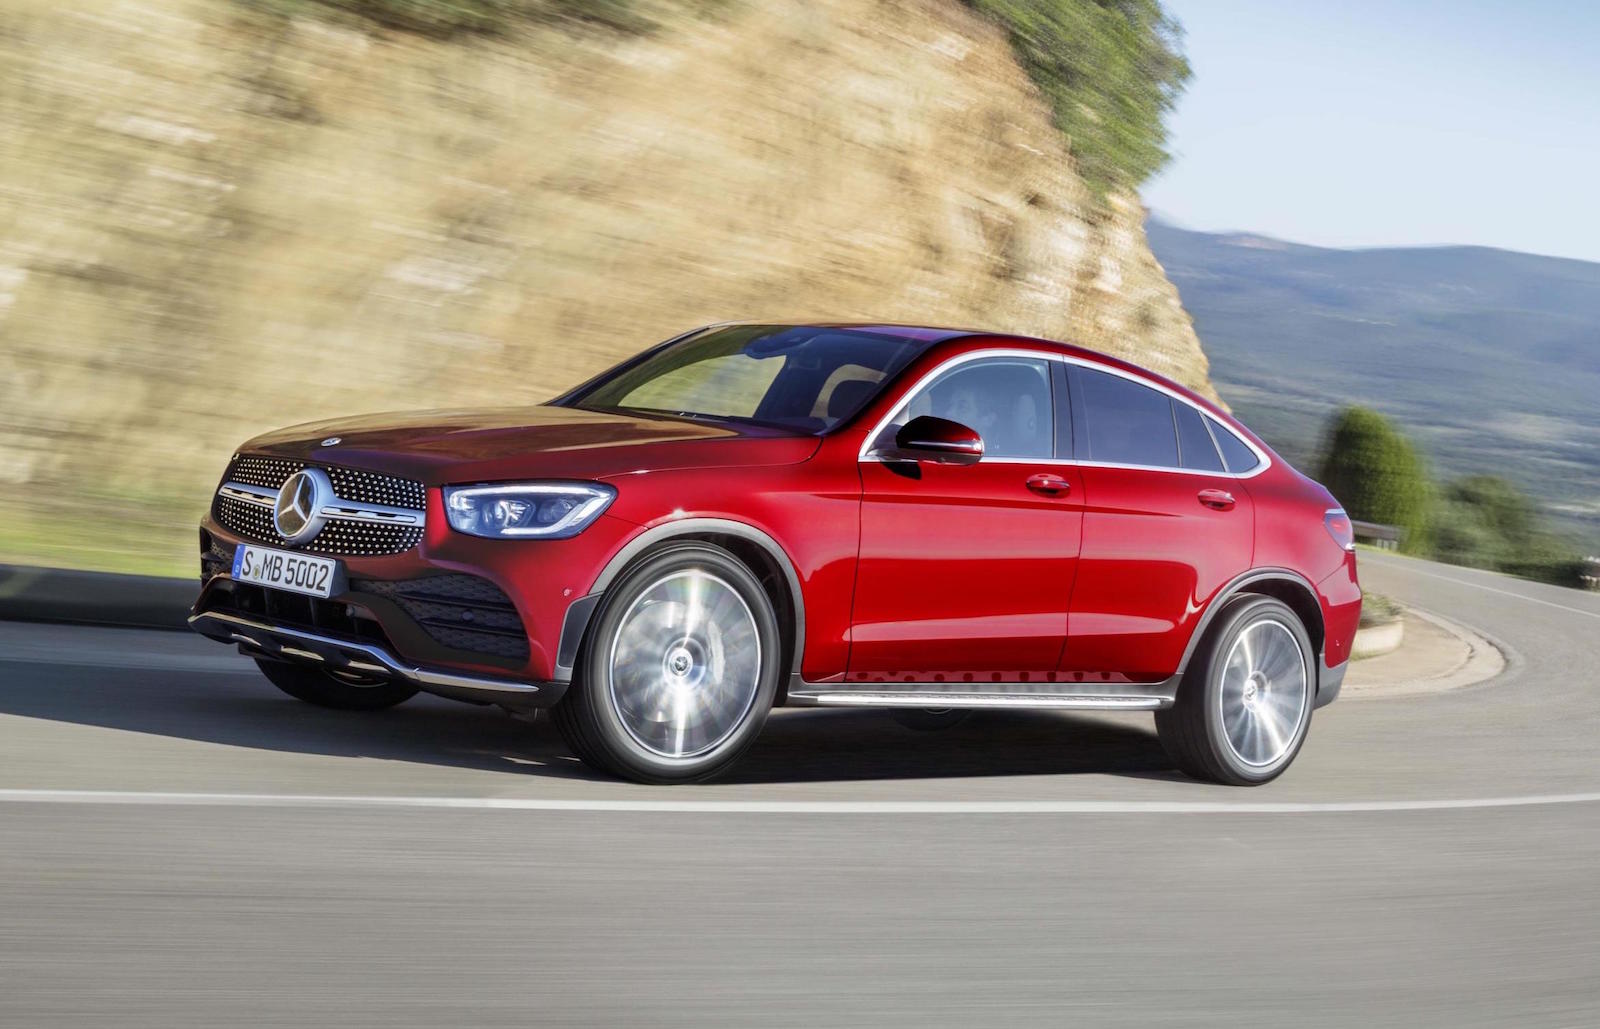 2020 Mercedes-Benz GLC Coupe revealed, gets EQ Boost technology